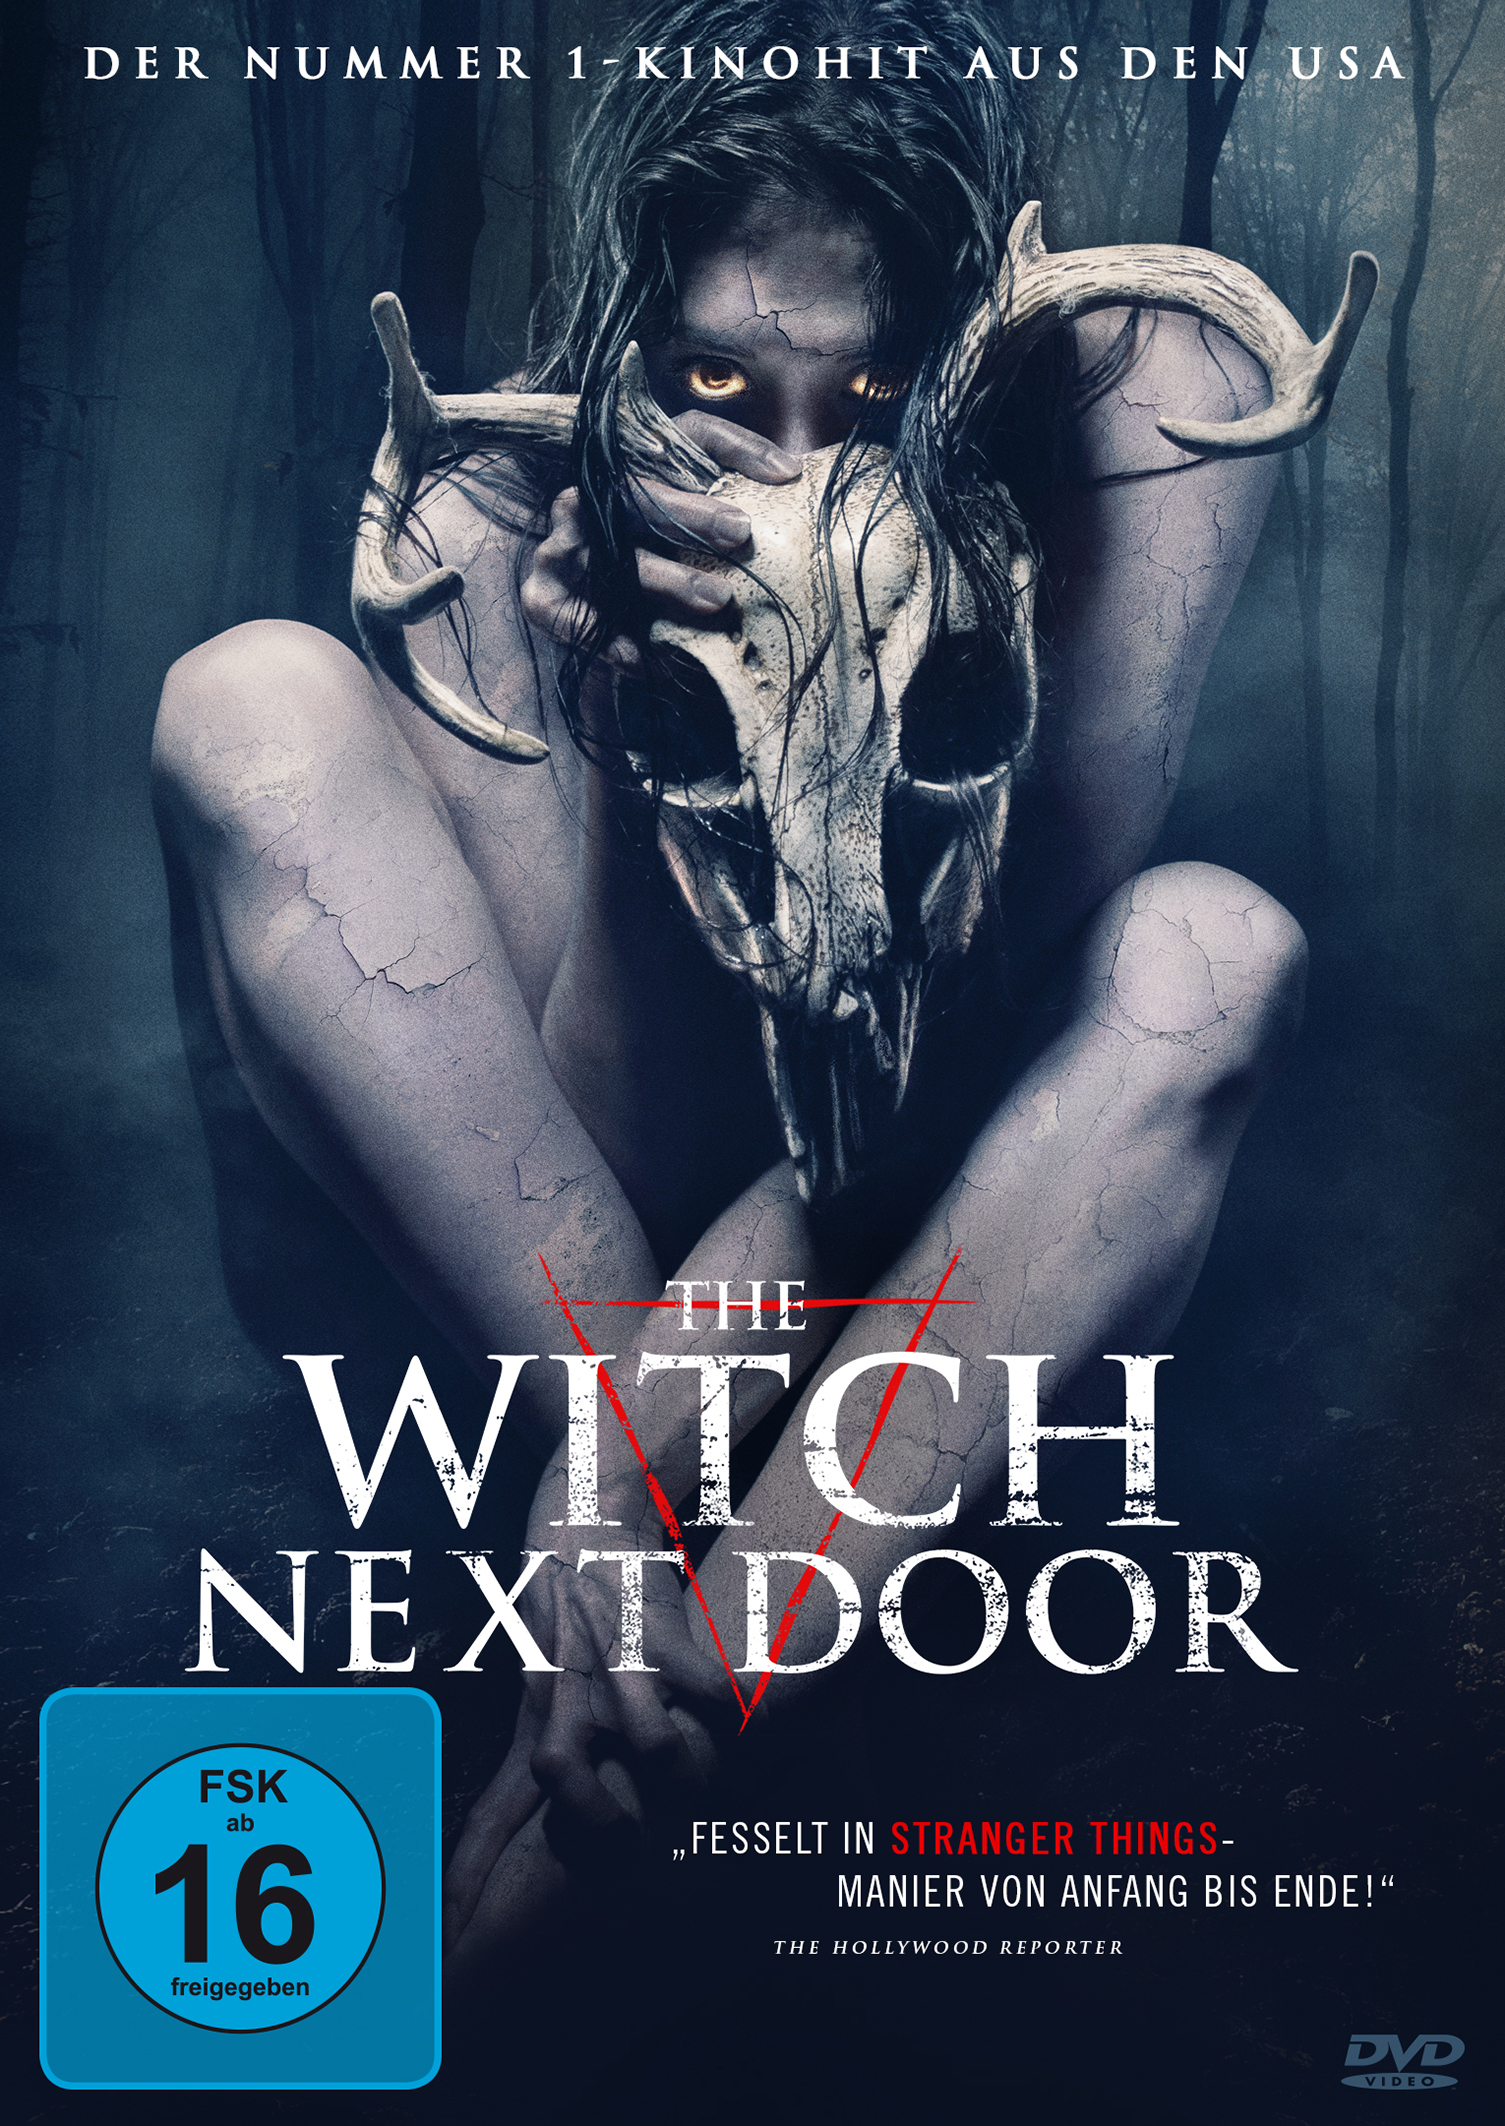 The Witch next Door (DVD)  Cover